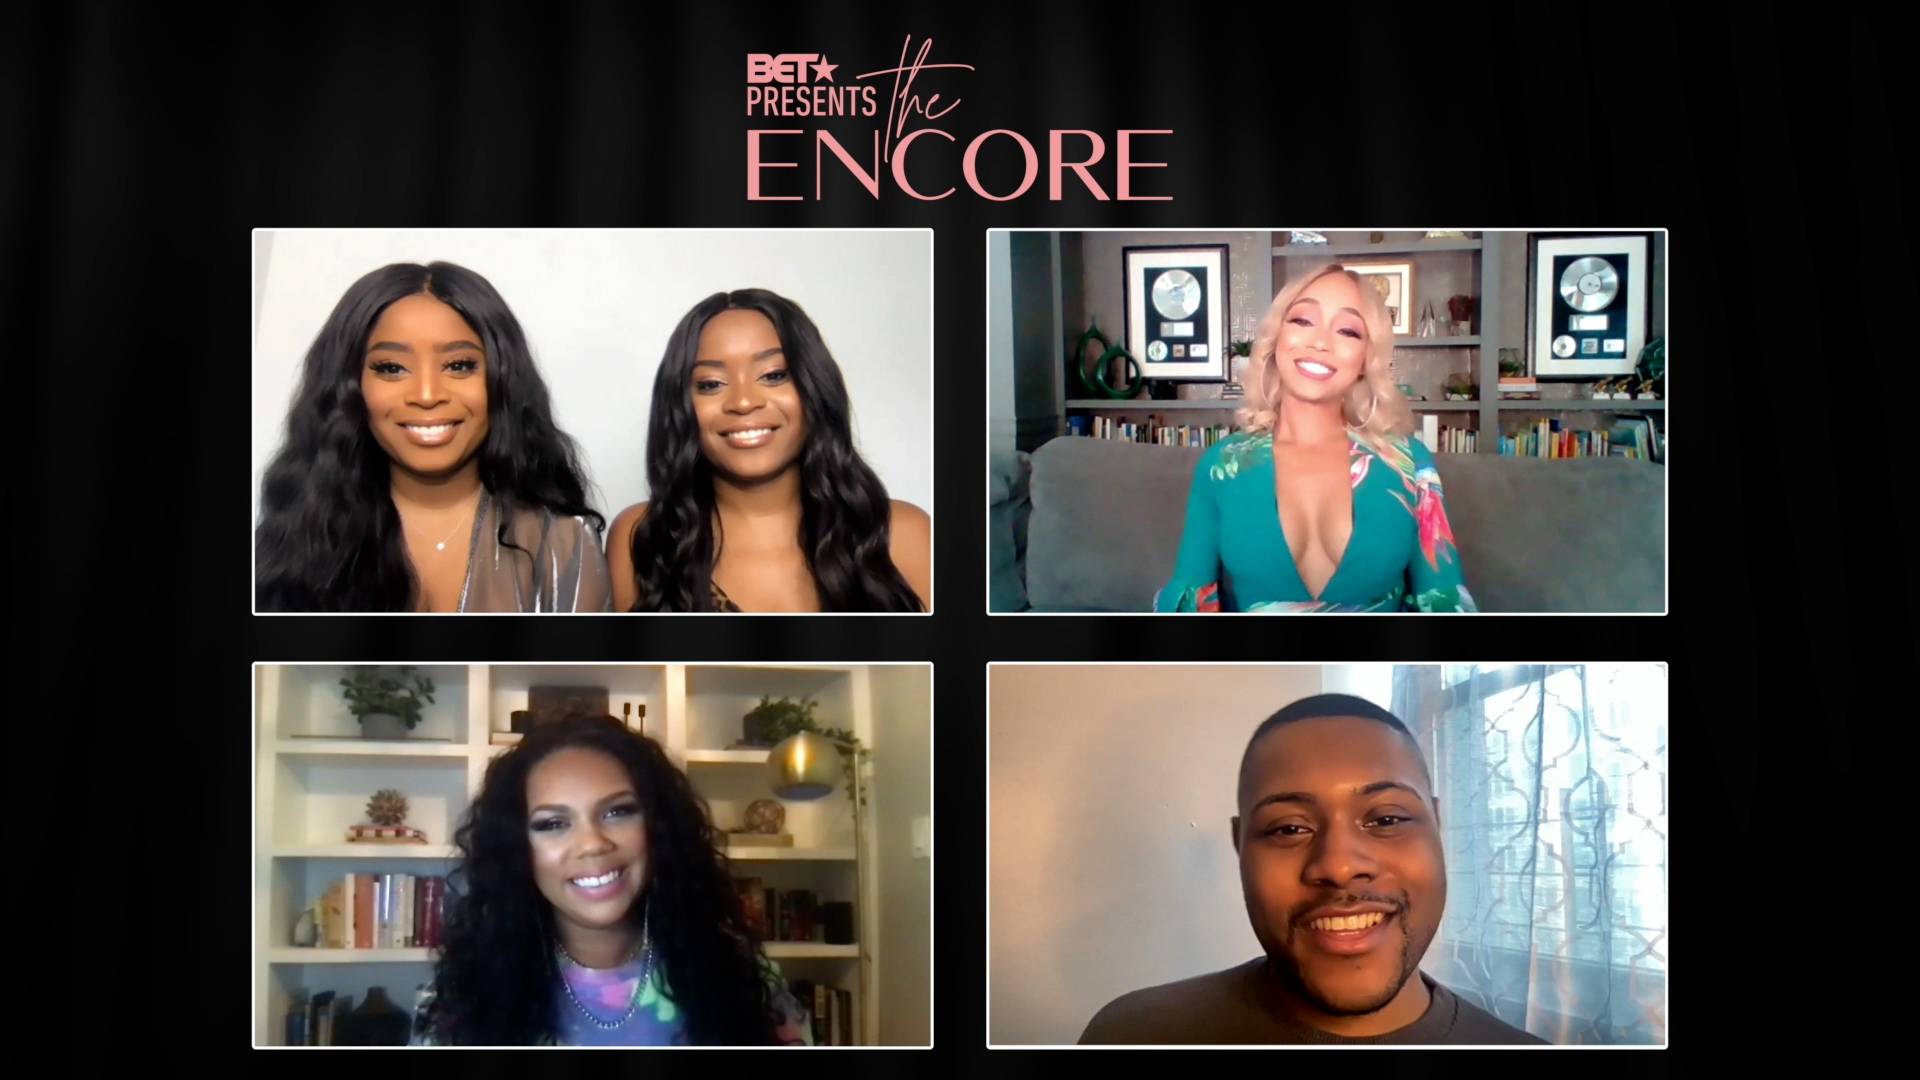 BET interviews the ladies of “The Encore”